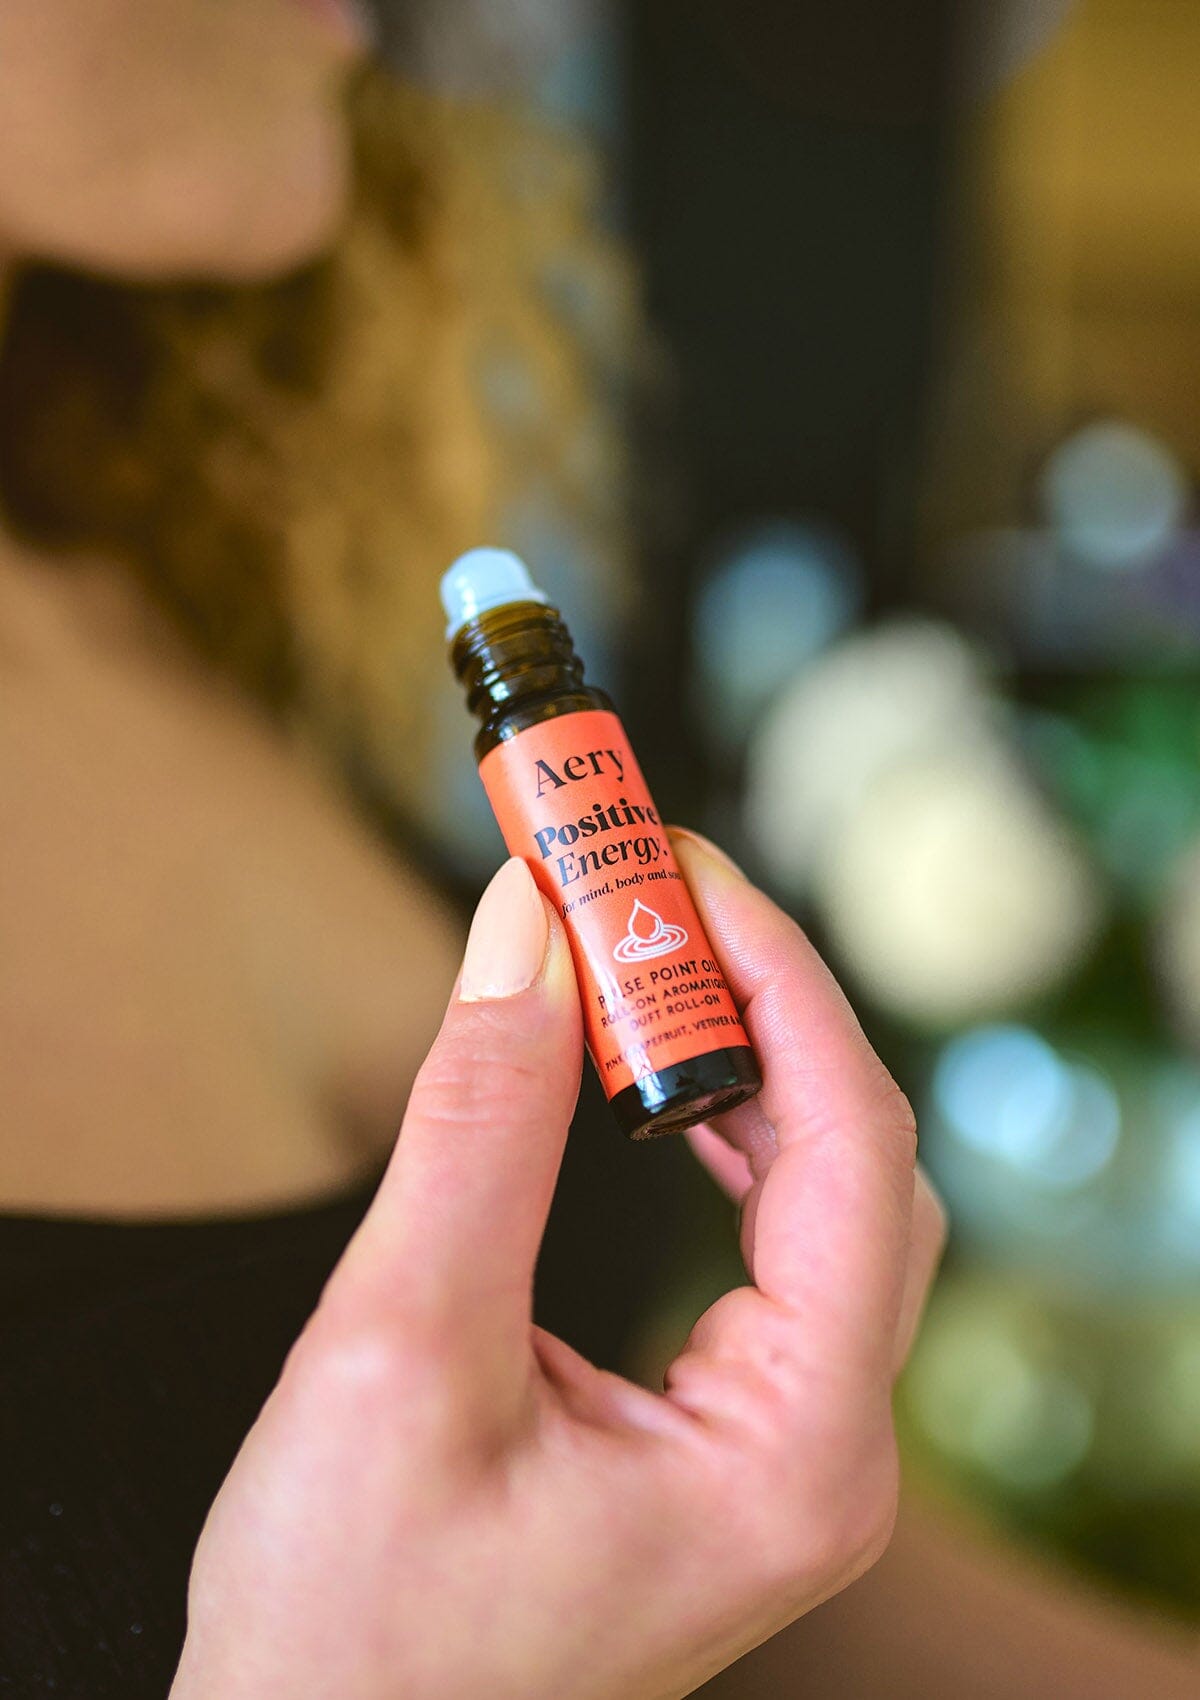 Red Positive Energy pulse point oil by Aery displayed in hands